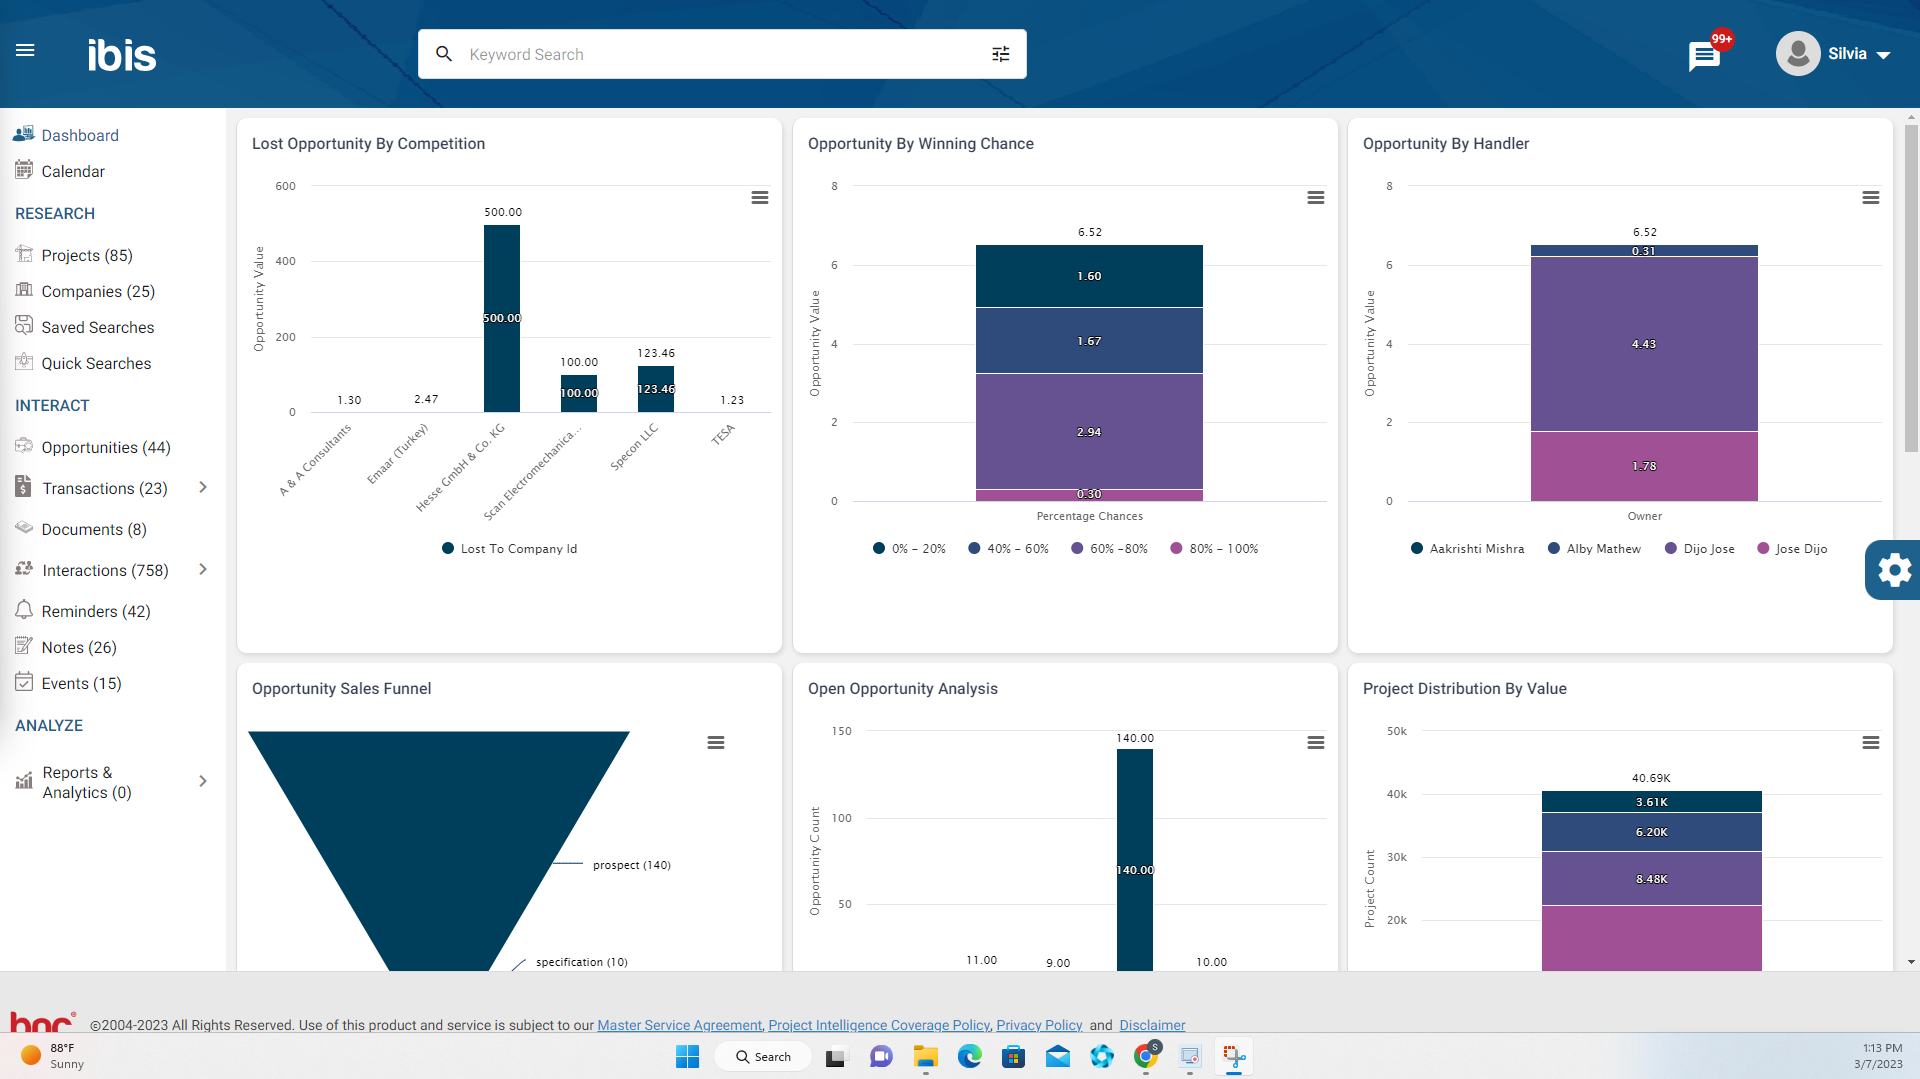 BNC IBIS CRM Dashboard, Forecast Analysis, and Reports